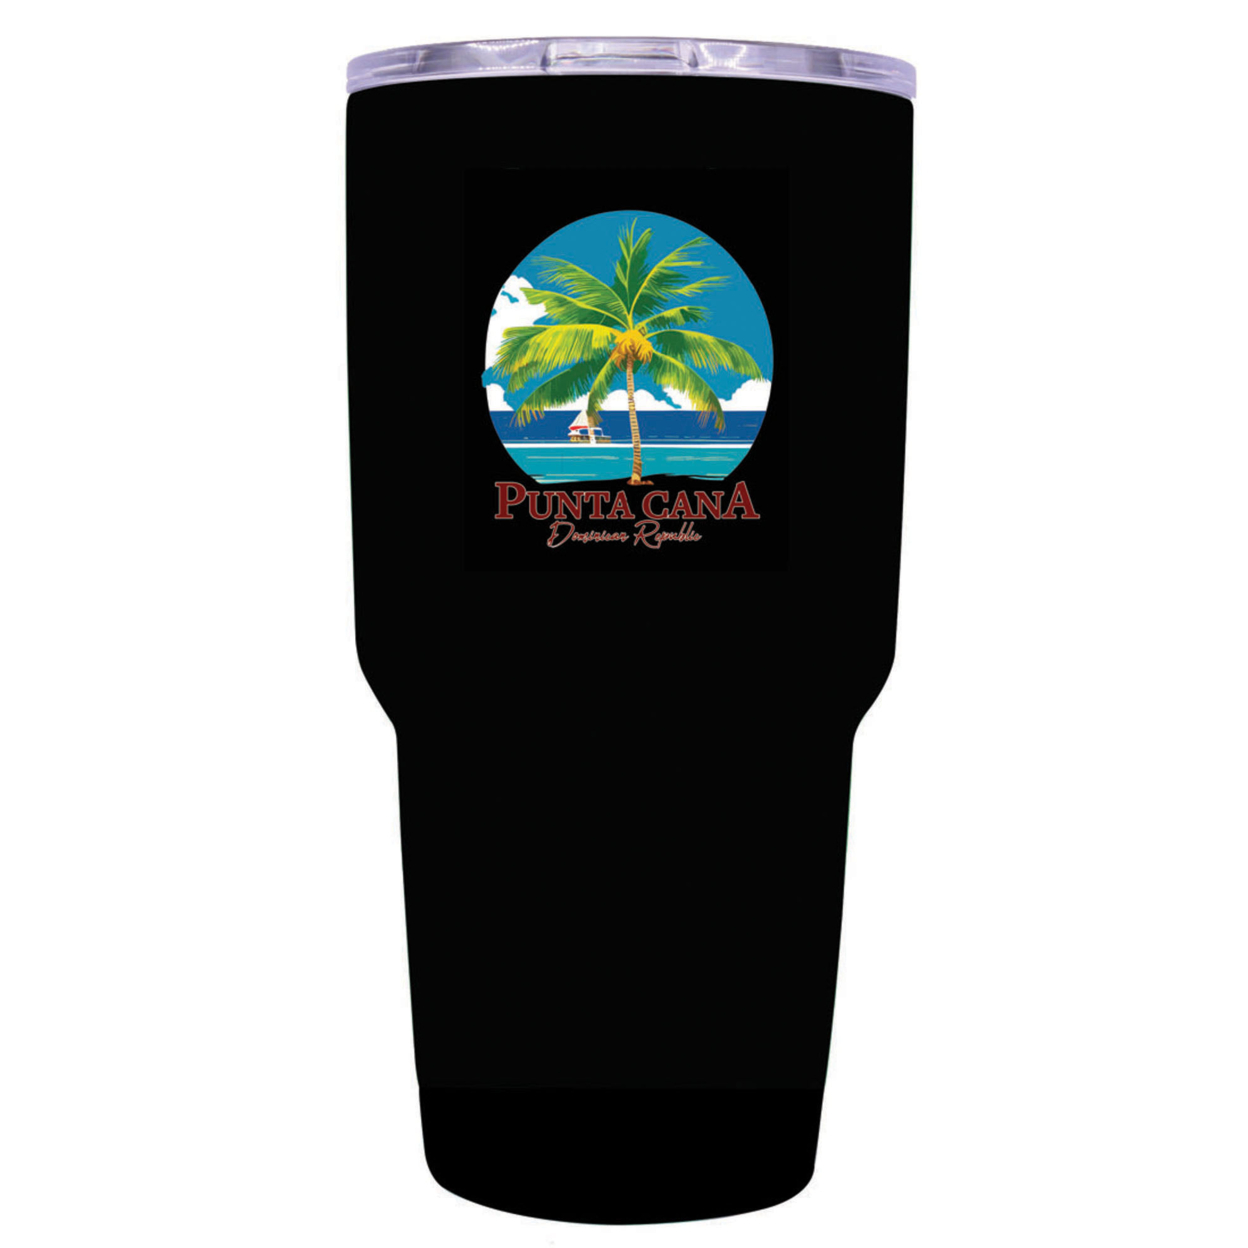 Punta Cana Dominican Republic Souvenir 24 Oz Insulated Stainless Steel Tumbler - Black, PALM